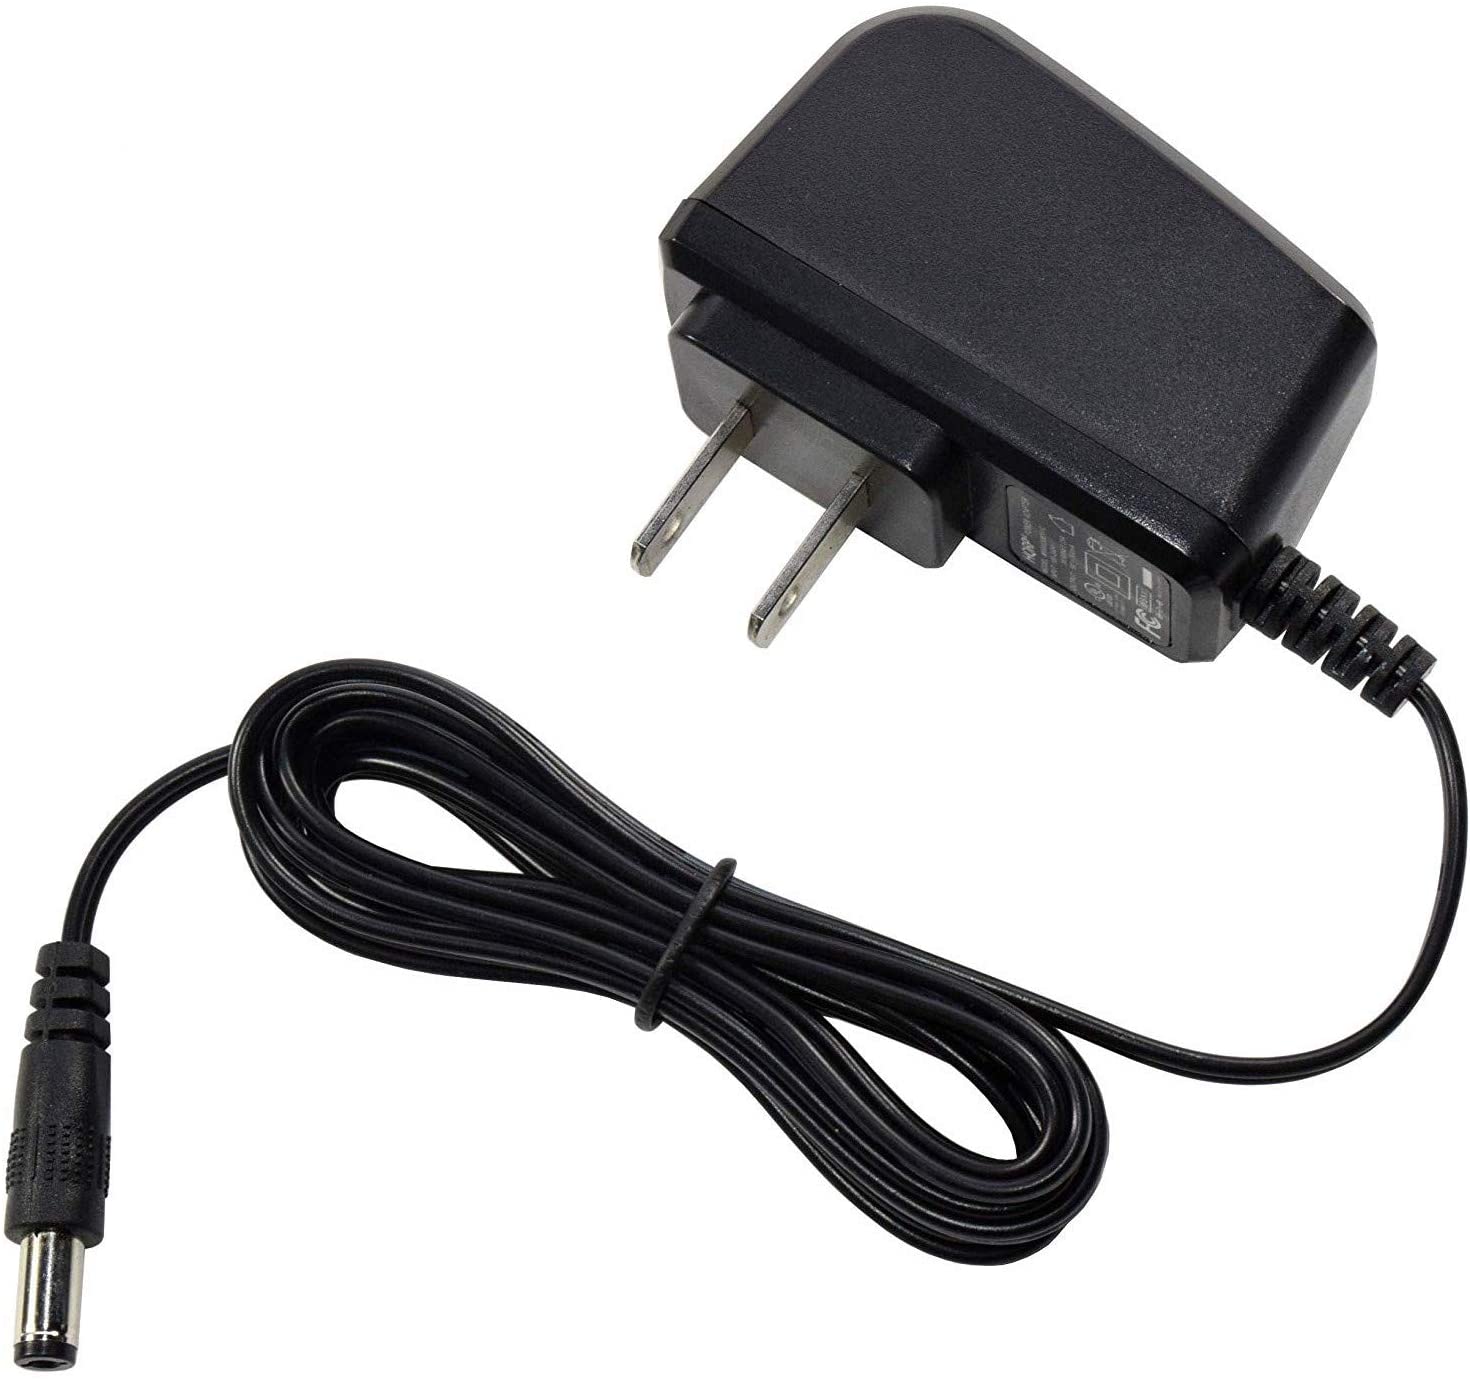 HQRP AC Adapter / Power Supply compatible with Boss DR-66 DR. BEAT / DR-670 DR. RHYTHM Guitar Effects pedals